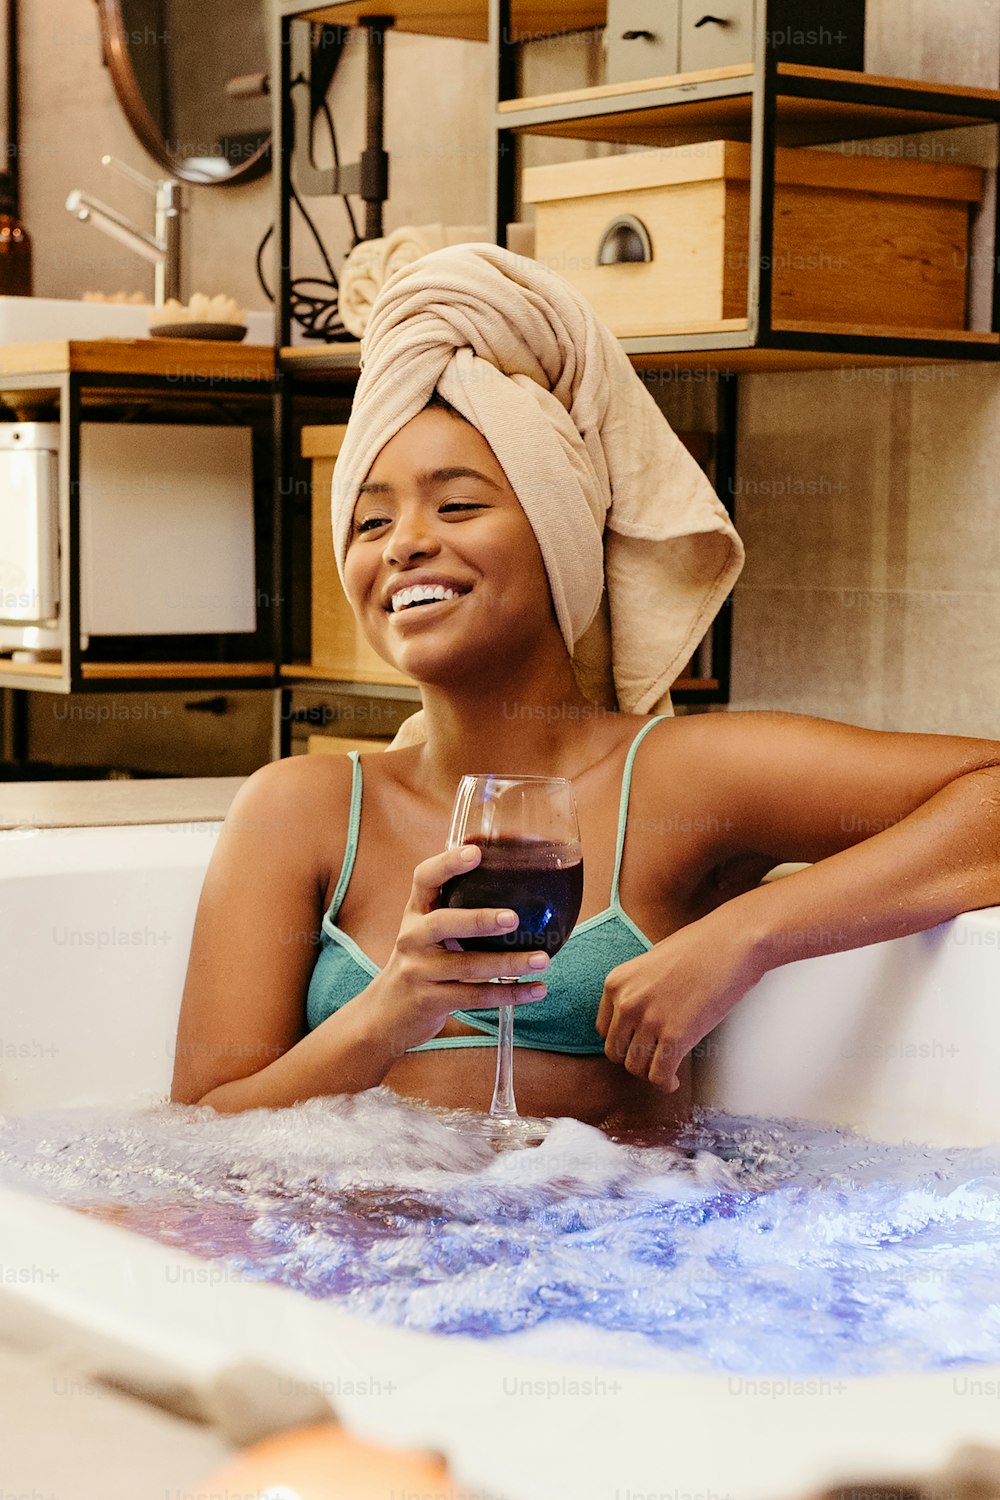 a woman sitting in a bathtub holding a glass of wine